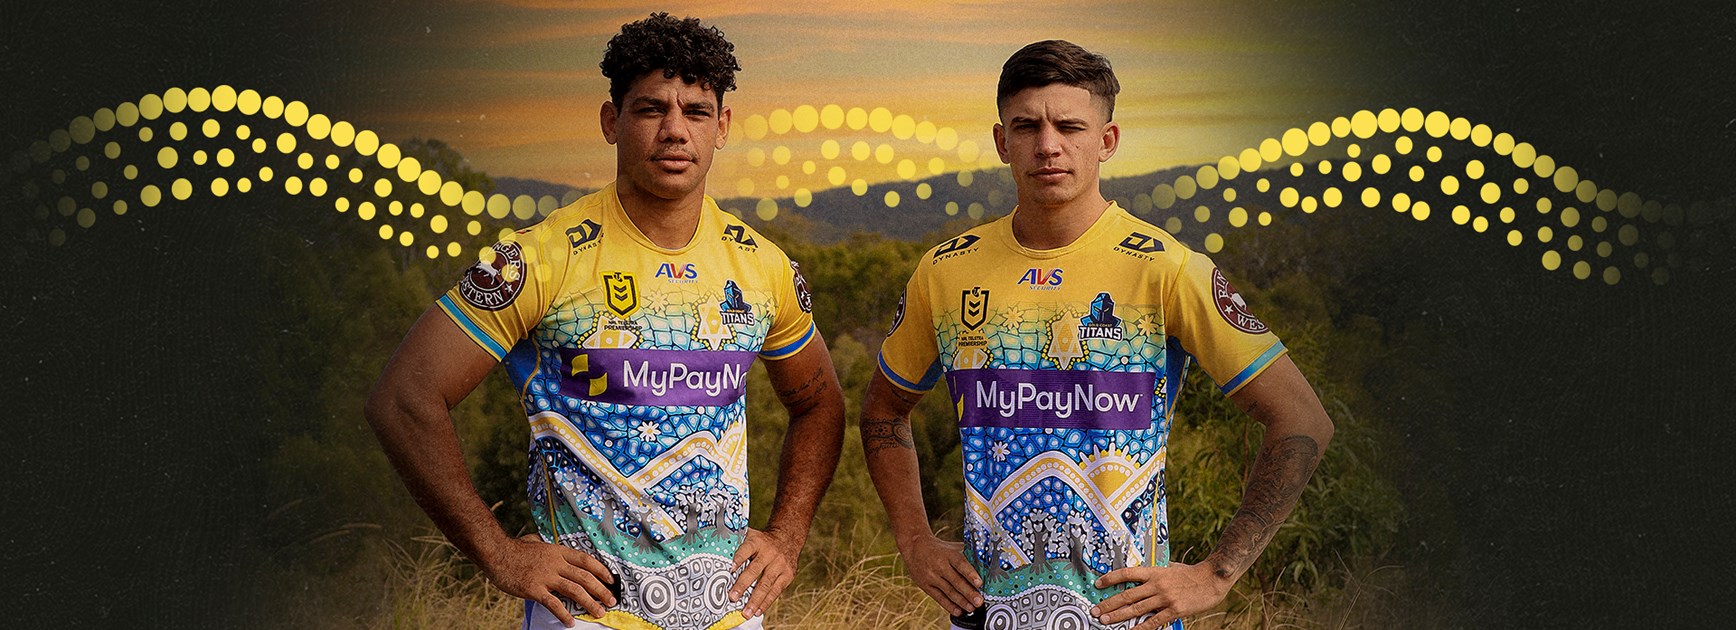 Best NRL jerseys: The greatest design from every club